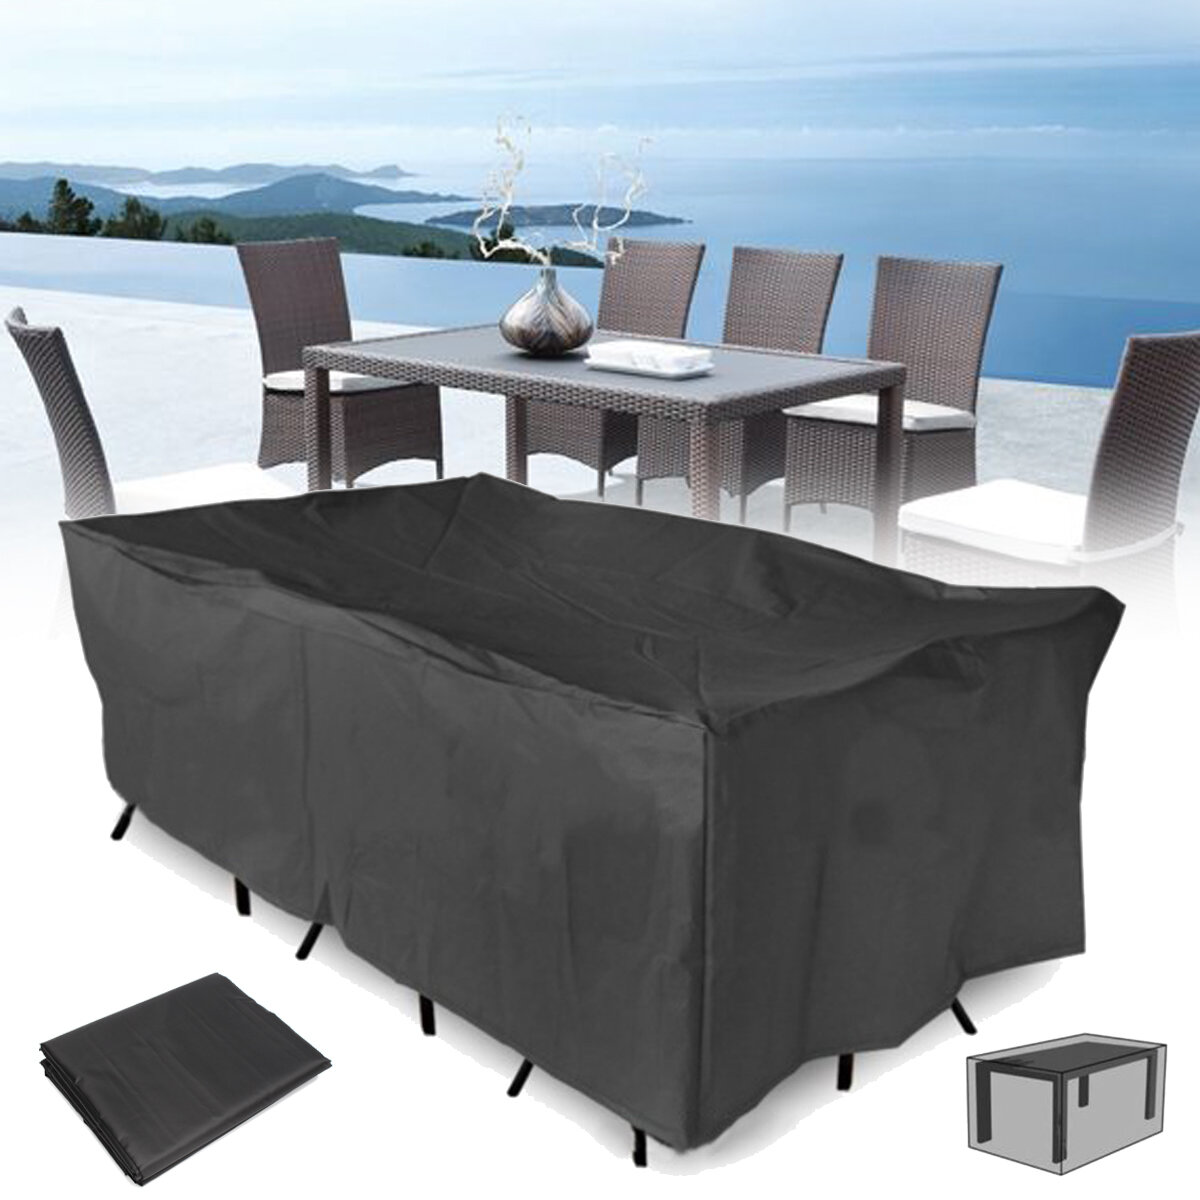 320x220x70CM Outdoor Garden Patio Furniture Waterproof Dust Cover Table Chair Sun Shelter